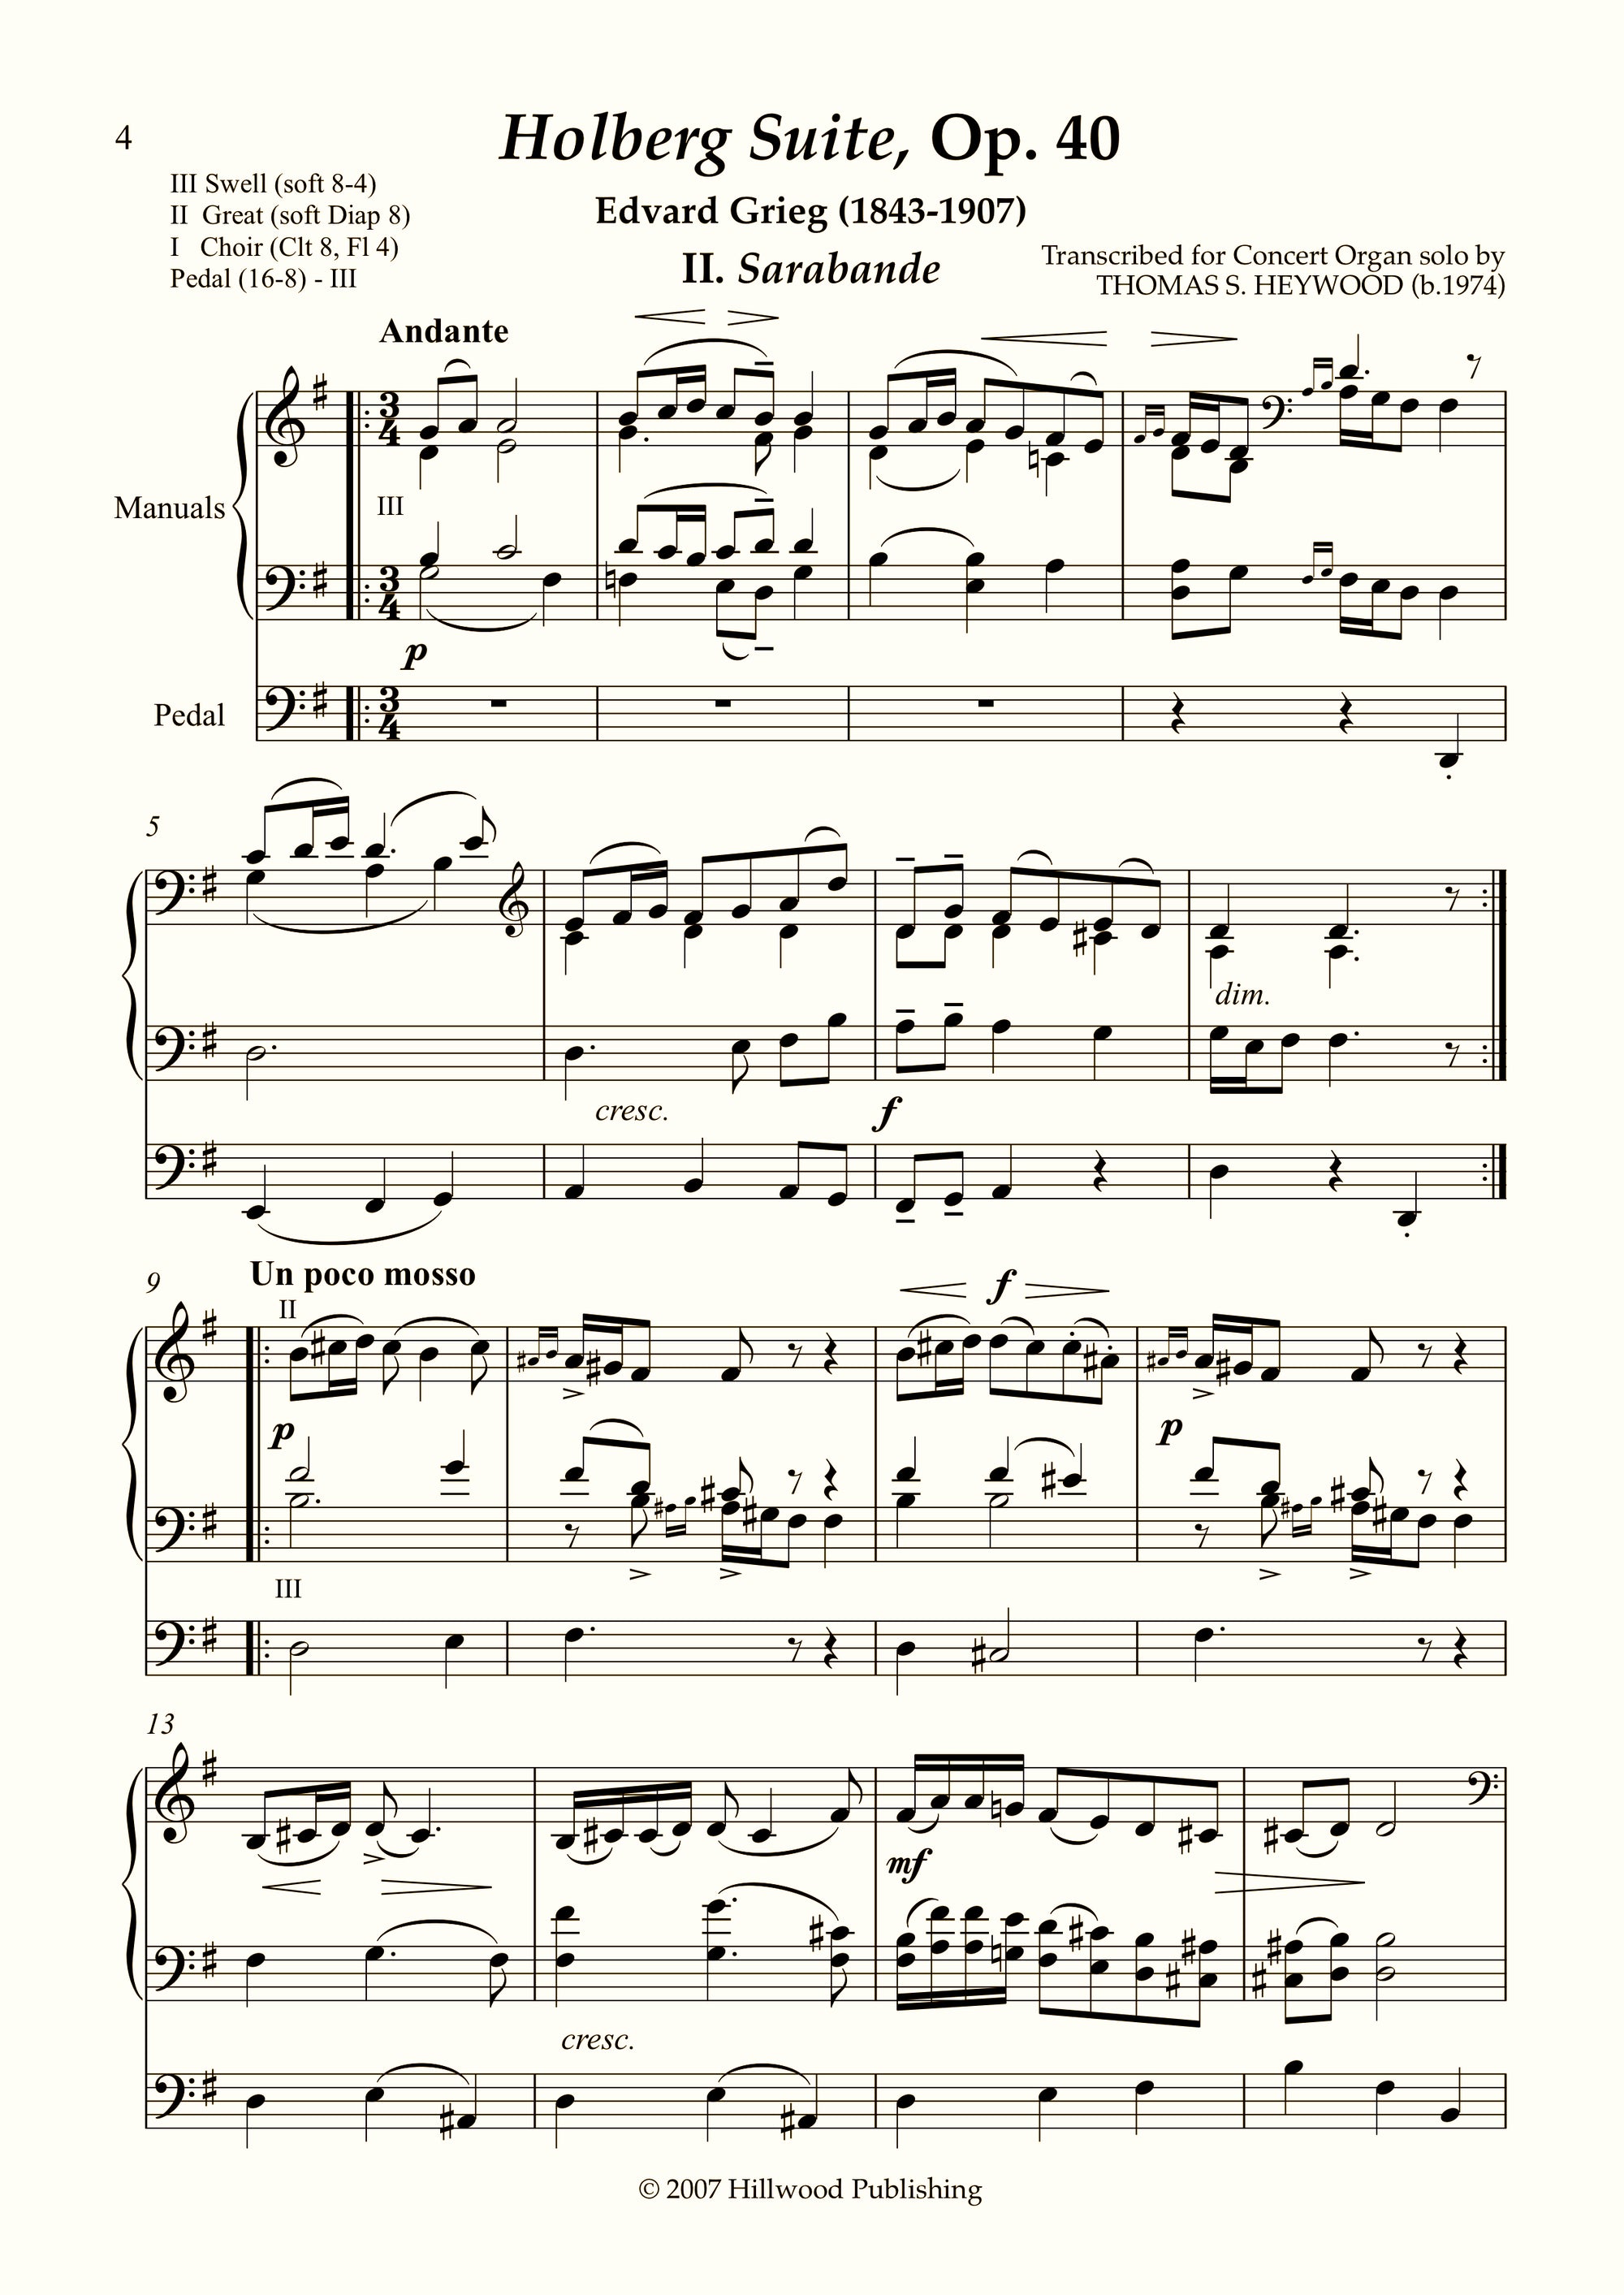 Grieg/Heywood - Sarabande from the Holberg Suite, Op. 40 (Score)